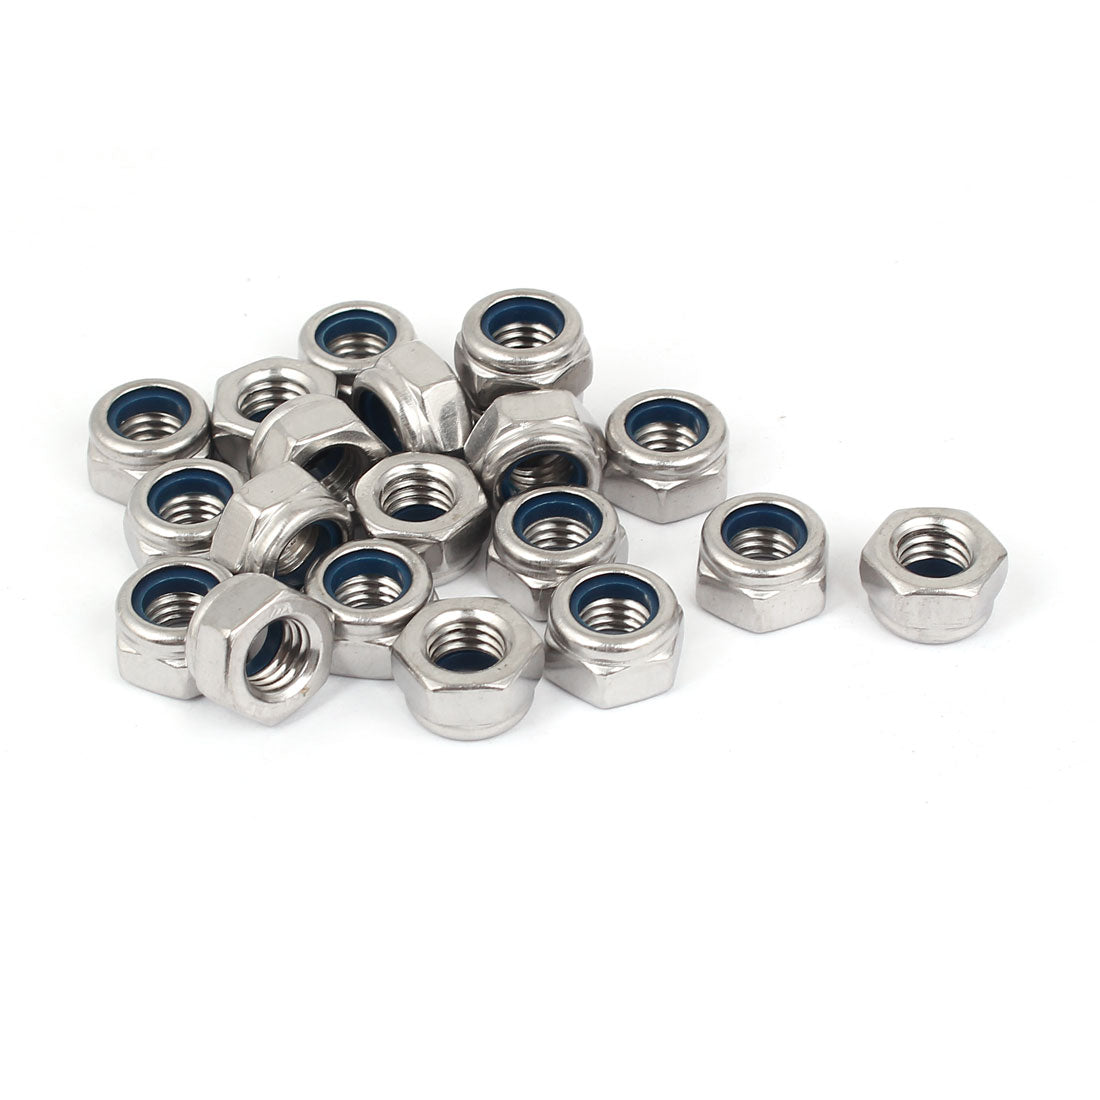 Uxcell Uxcell M8 304 Stainless Steel Nylock Self-Locking Nylon Insert Hex Lock Nuts 20pcs